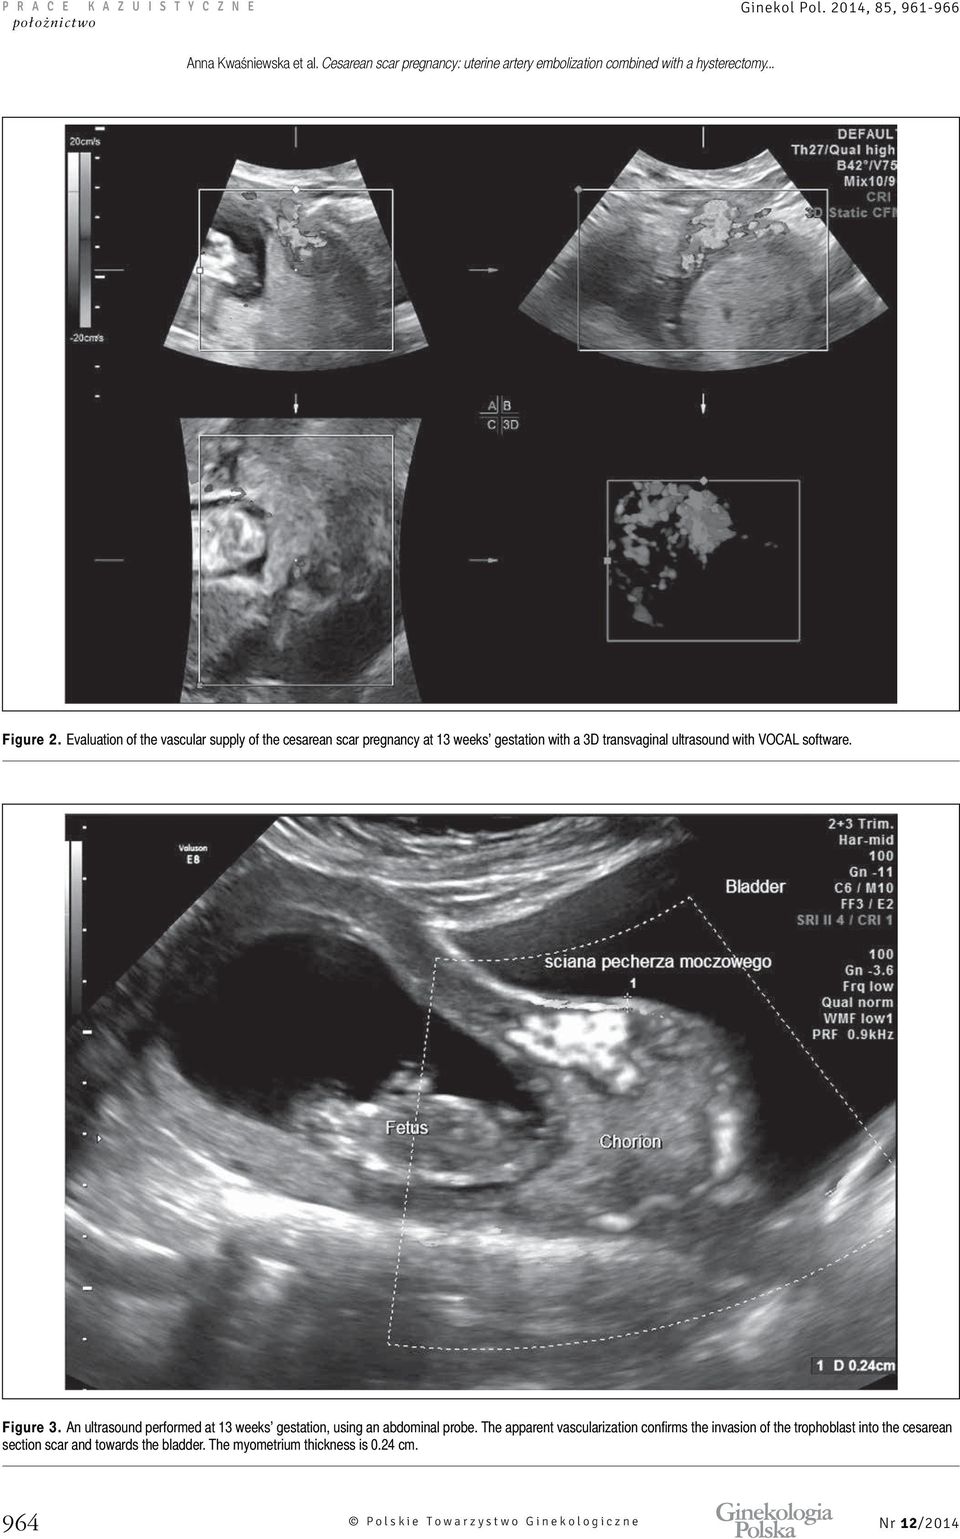 VOCAL software. Figure 3. An ultrasound performed at 13 weeks gestation, using an abdominal probe.